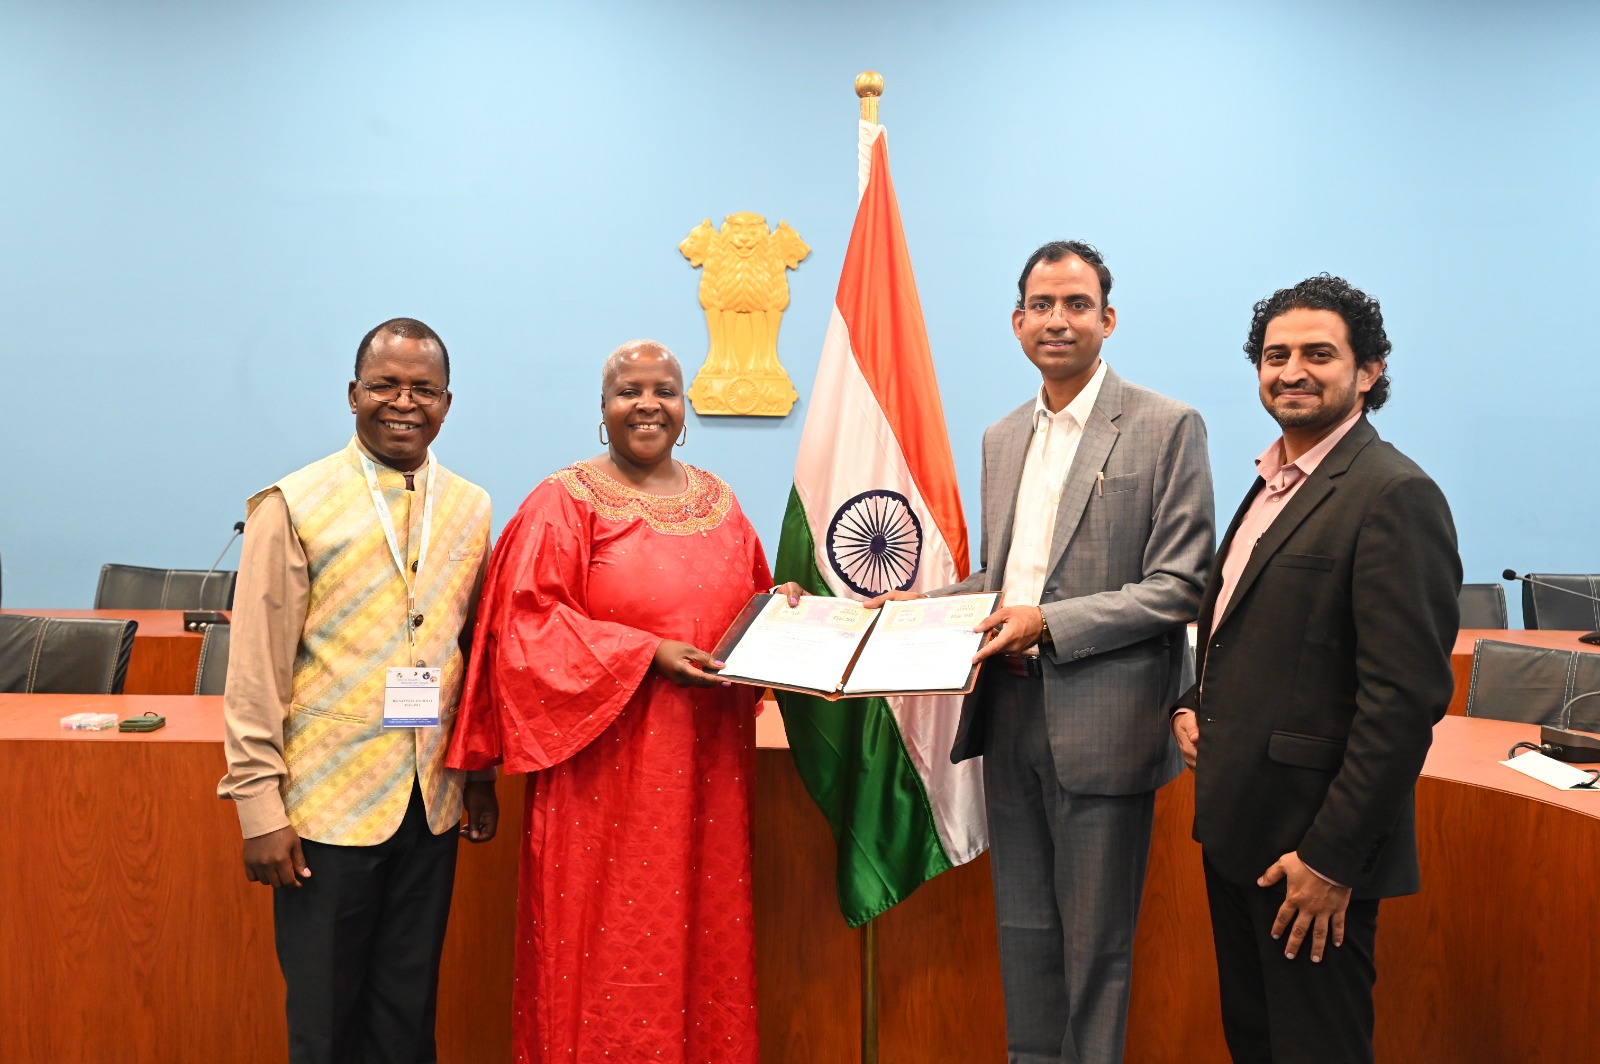 Health Minister of Malawi, Hon. Khumbize Chiponda, visits Jitendra Sharma, MD & Founder CEO of AMTZ, to discuss Health Care Technology and Medical Technology in India